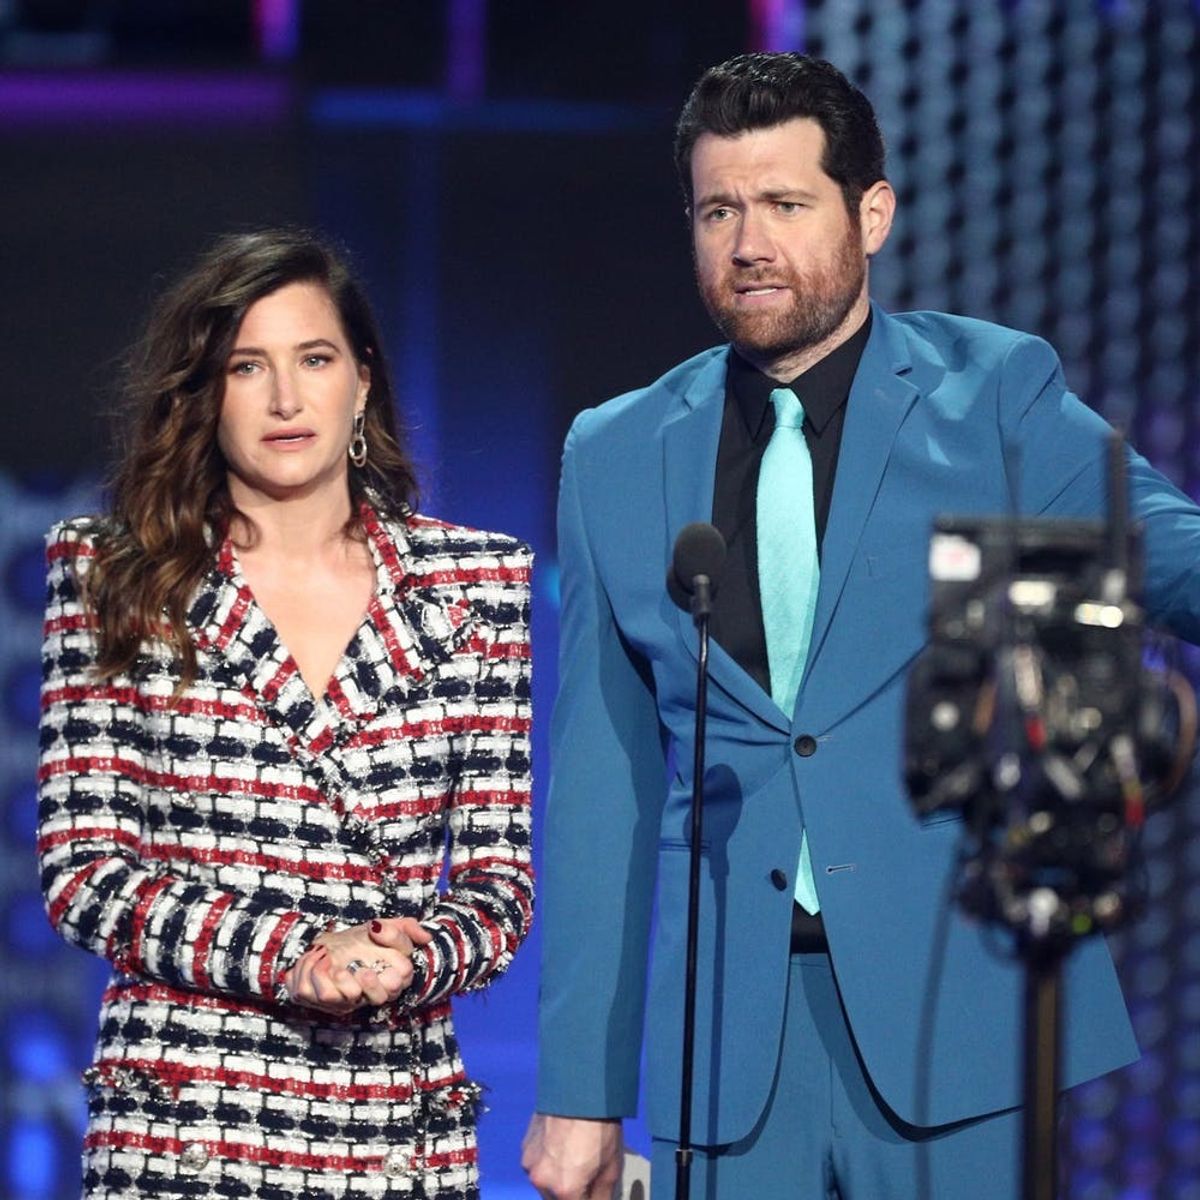 Billy Eichner Went Off-Script at the 2018 AMAs to Passionately Urge People to Vote